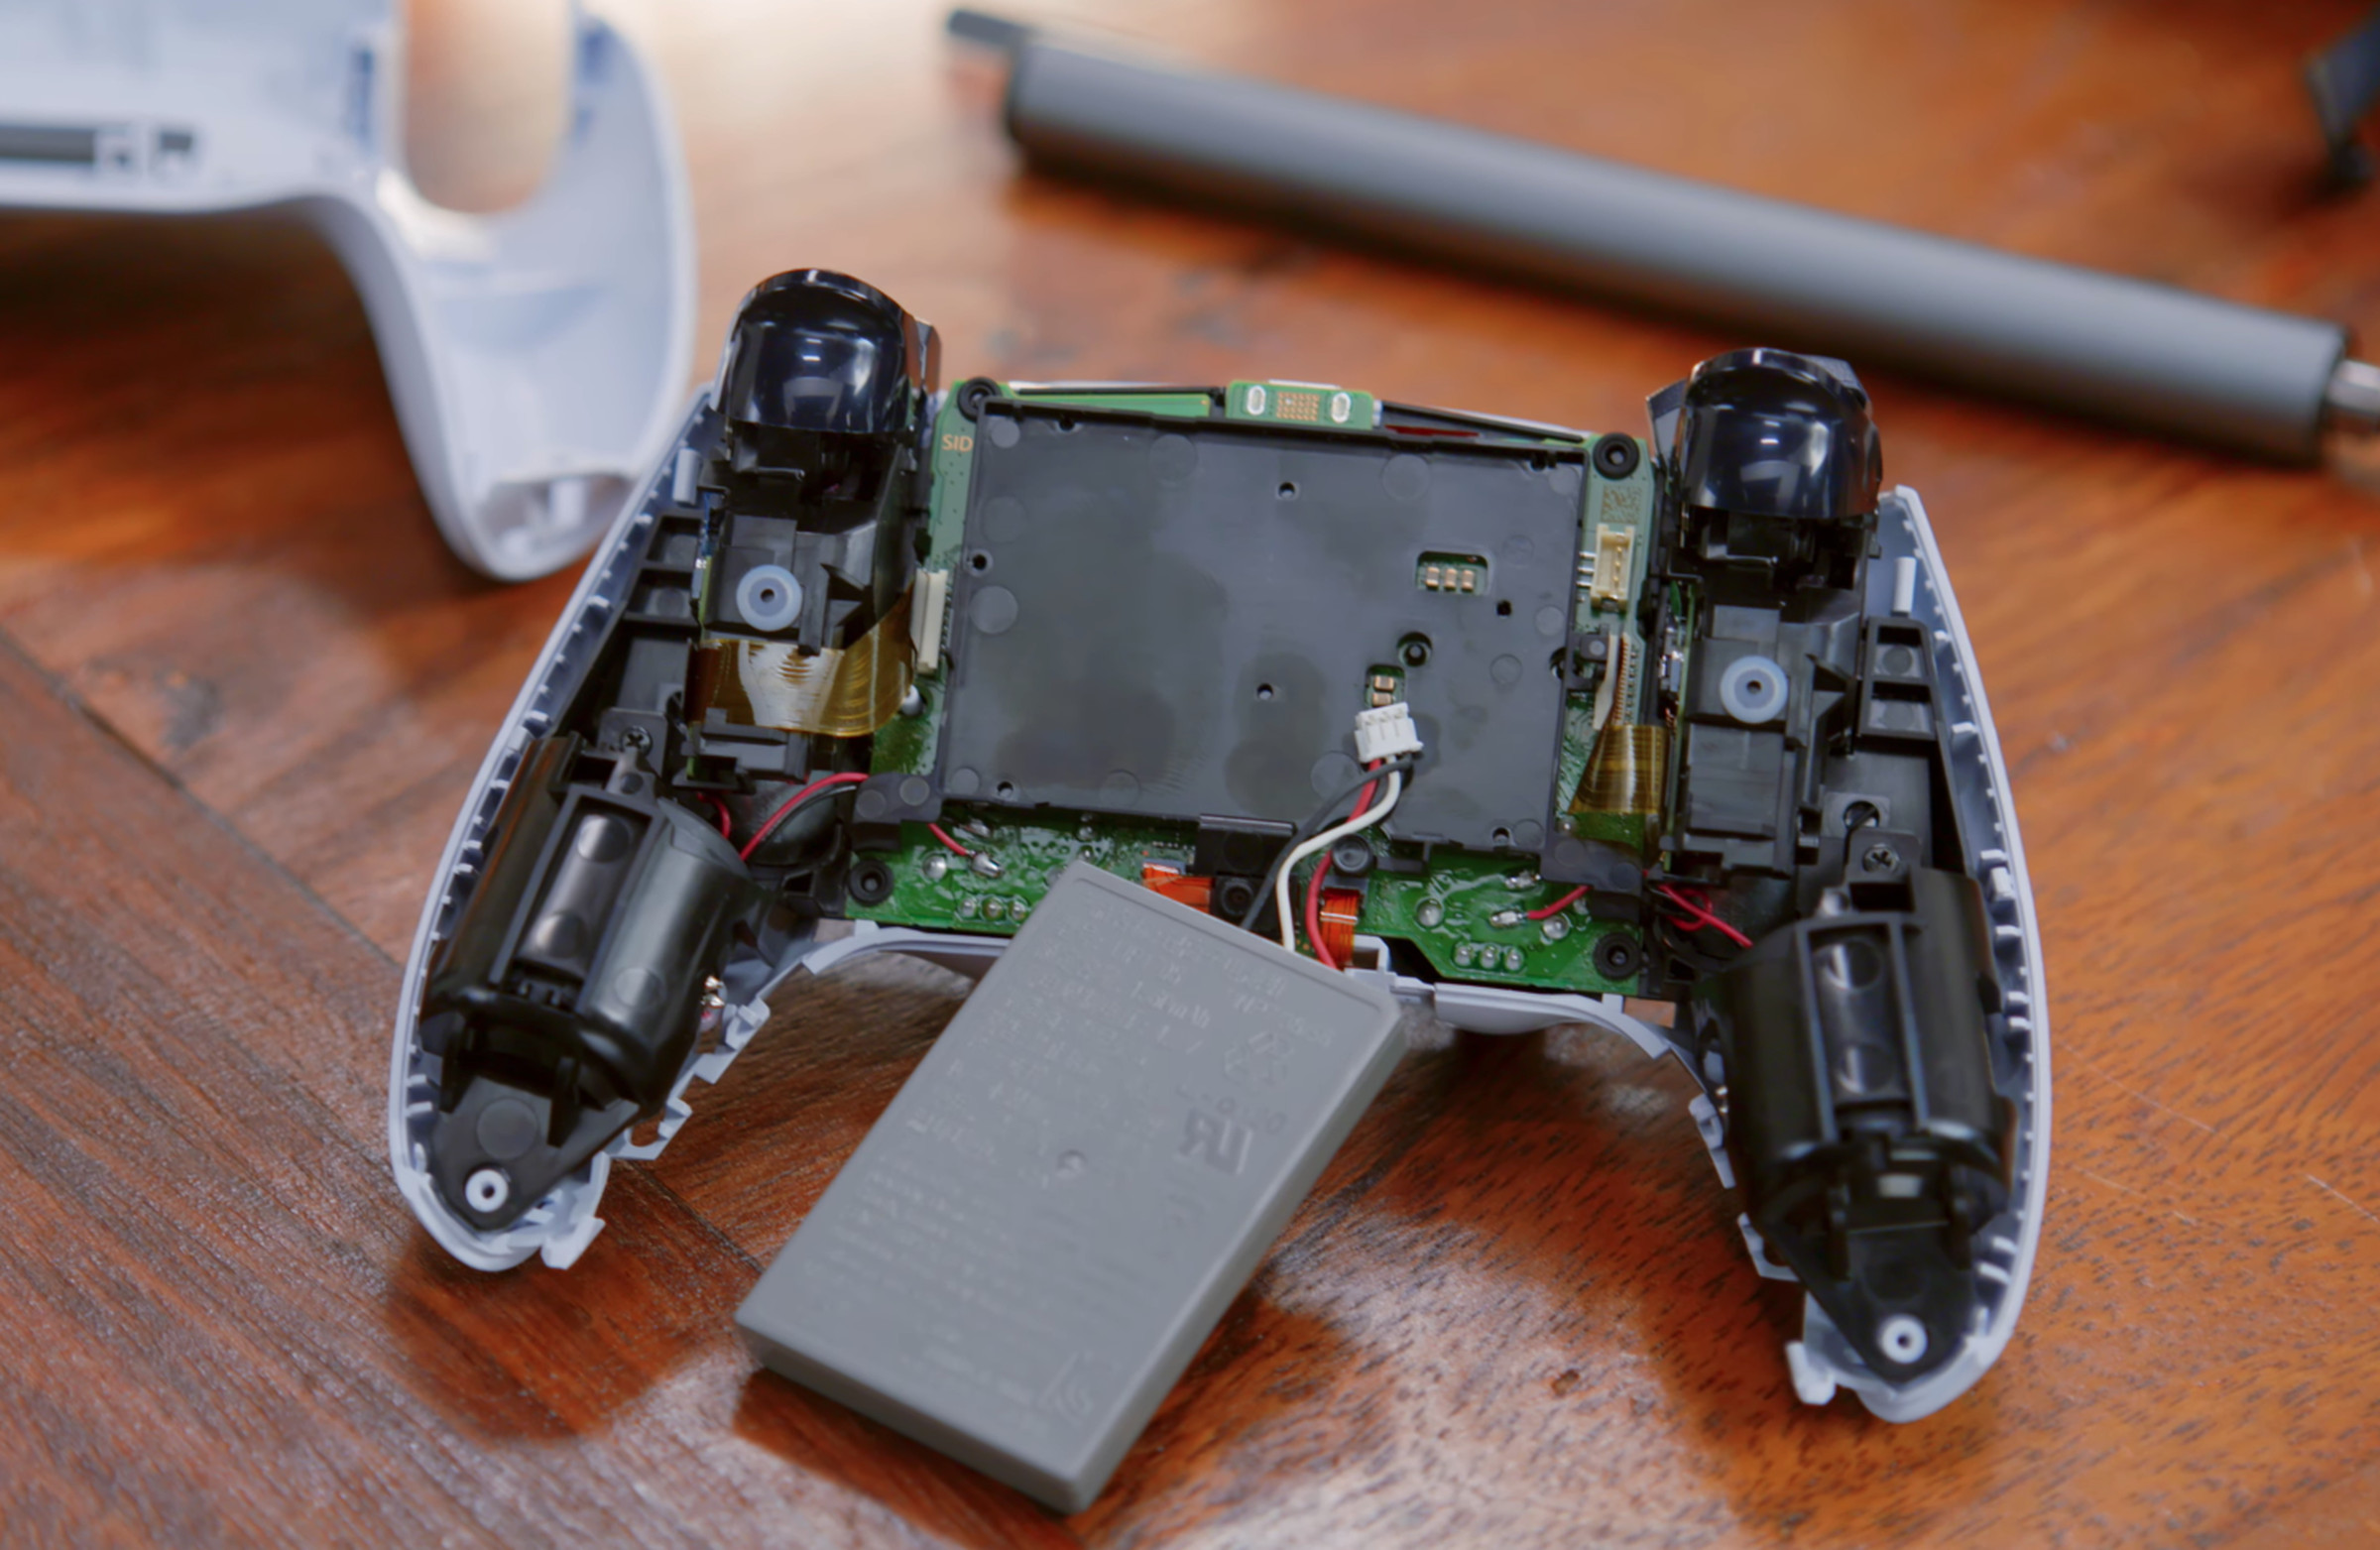 The inside of the DualSense controller.